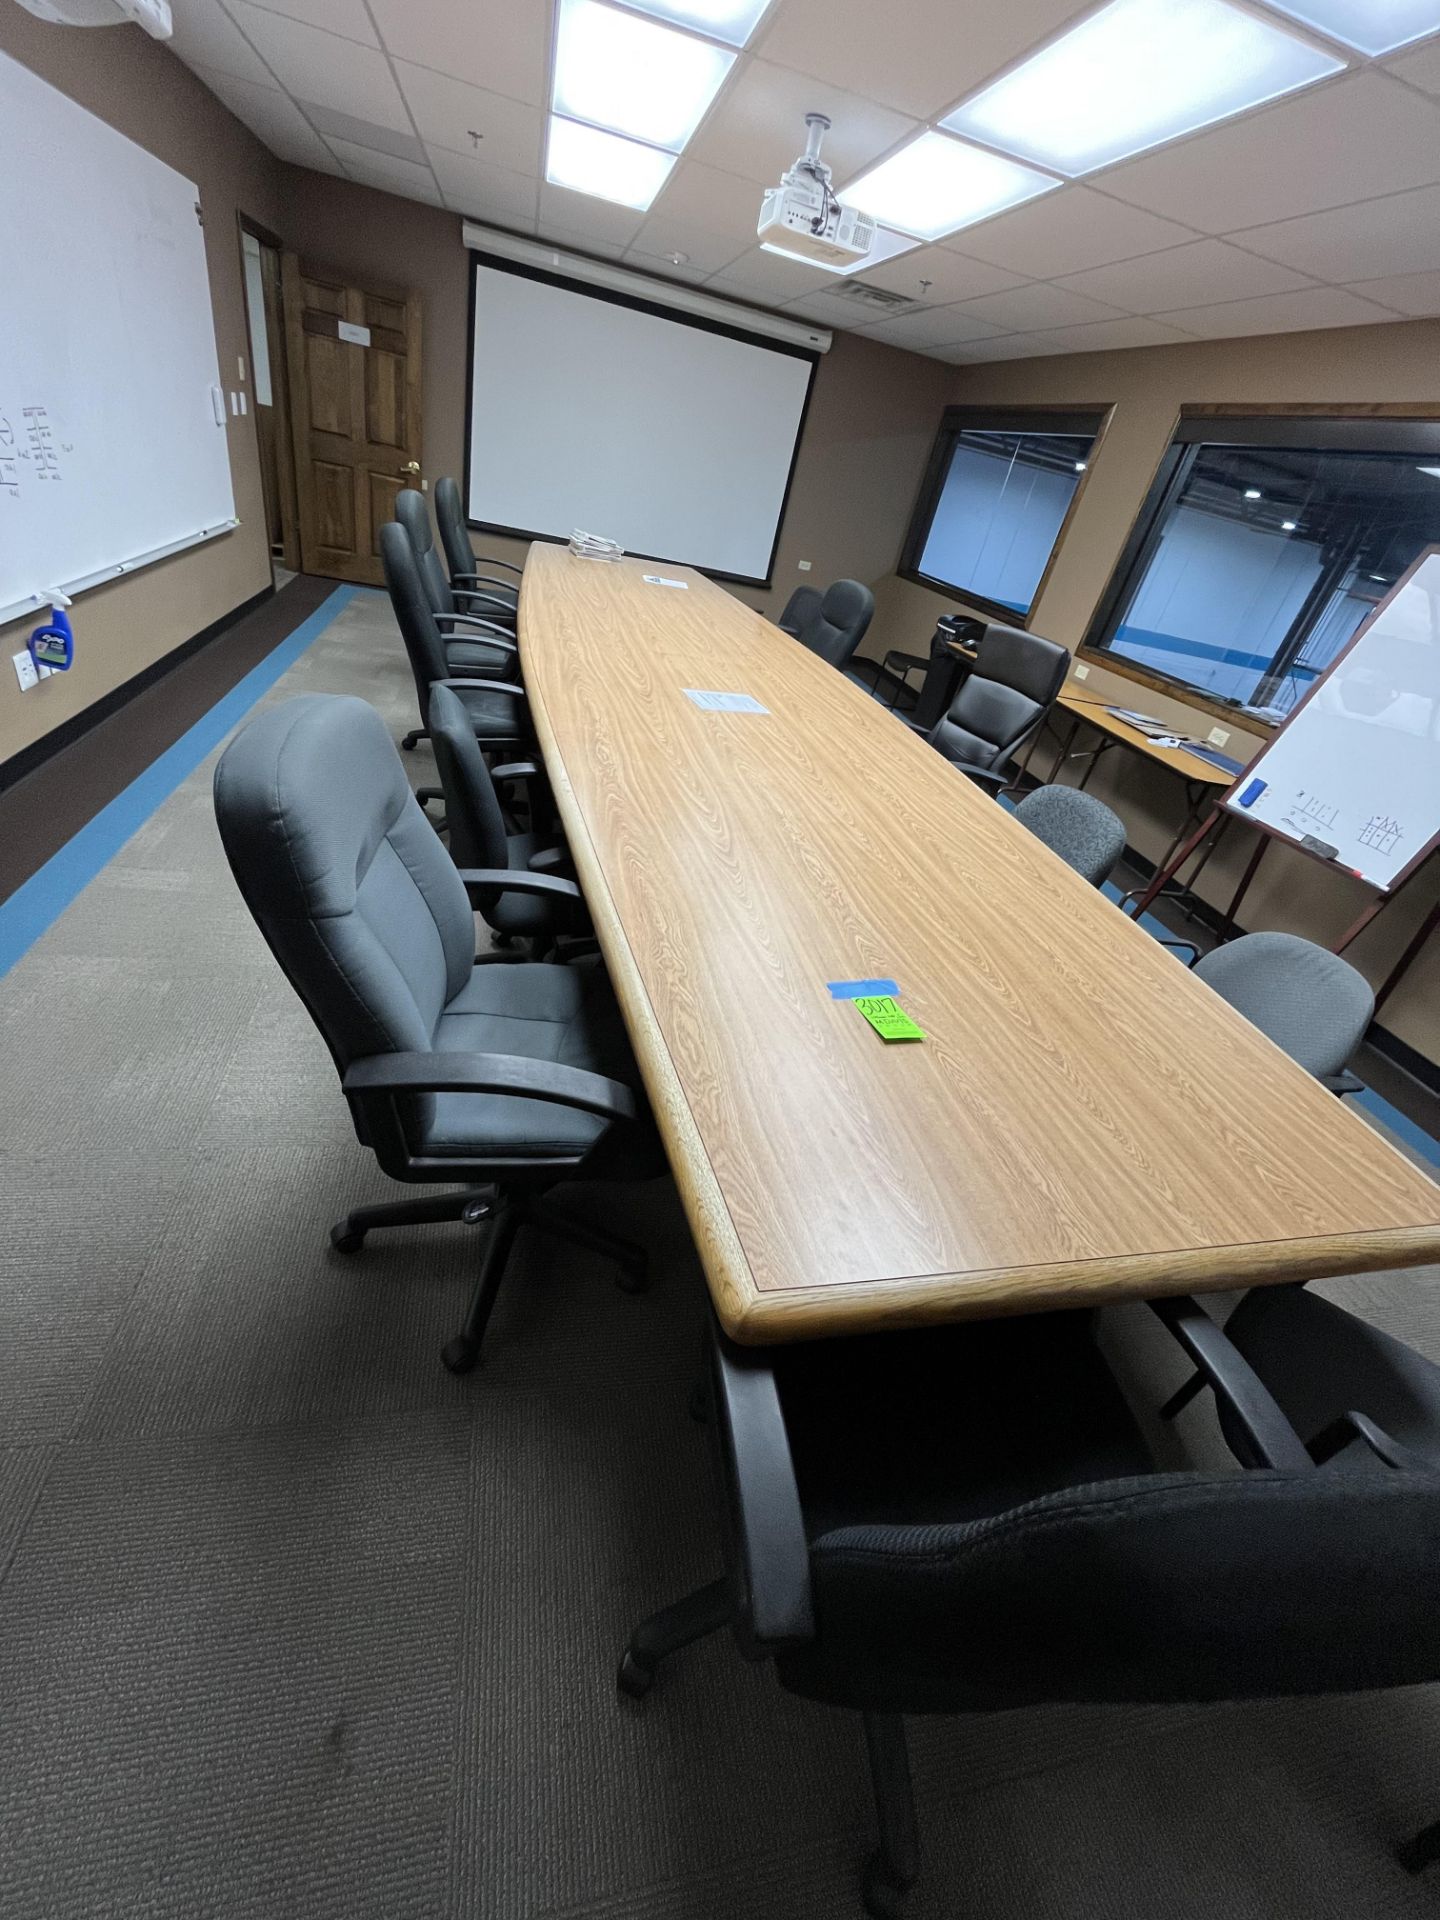 CONFERENCE TABLE AND CHAIRS